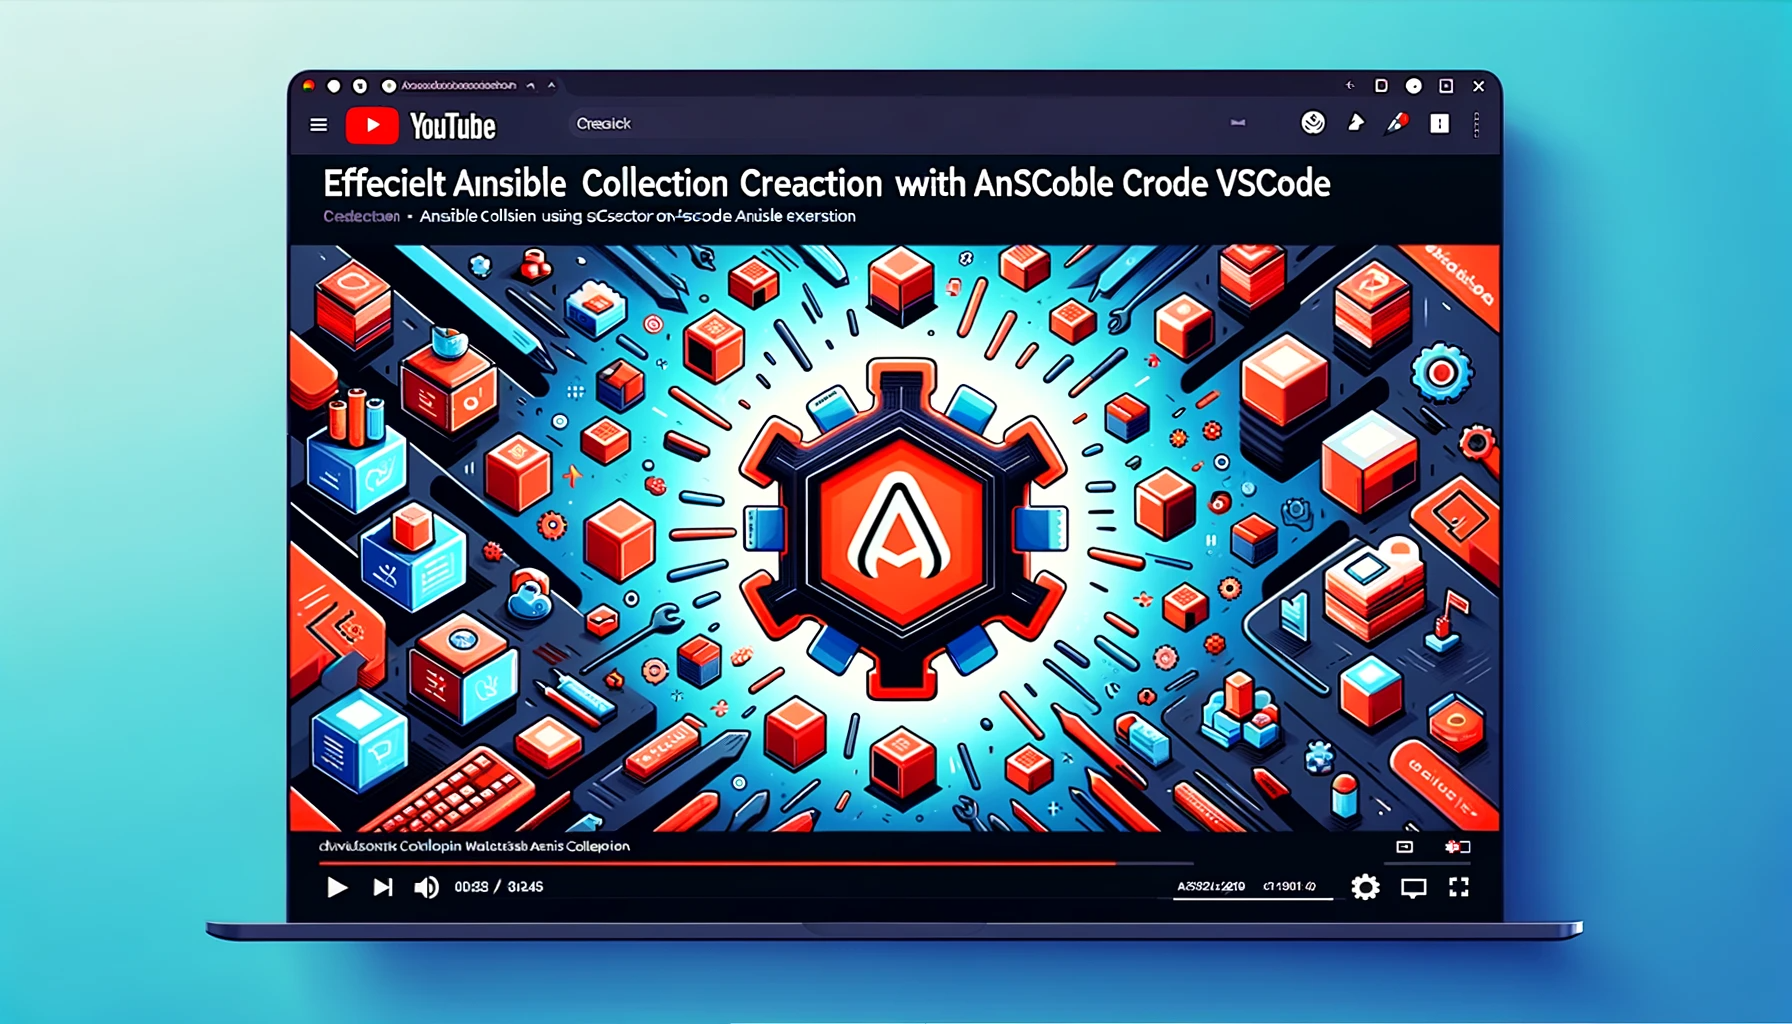 Creating Ansible Collection Using ansible-creator and VS Code Ansible Extension